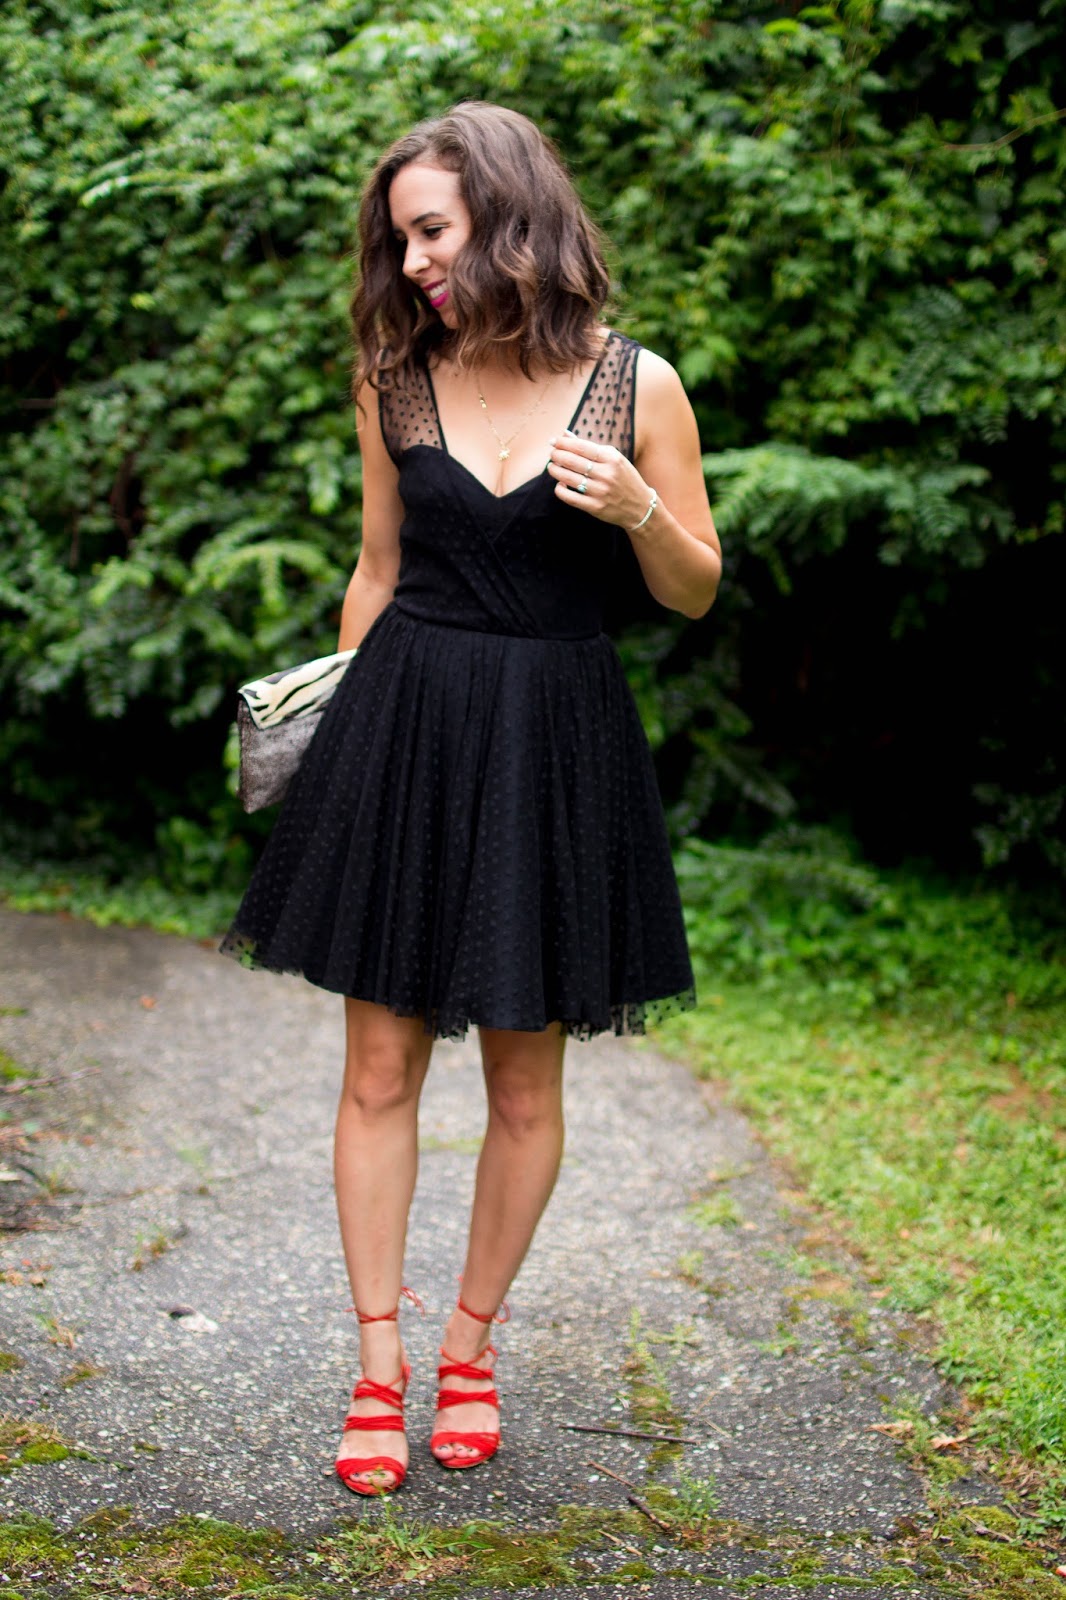 How to wear black to a summer wedding. | A.Viza Style | milly rent the runway dress - wedding guest outfit - dc blogger